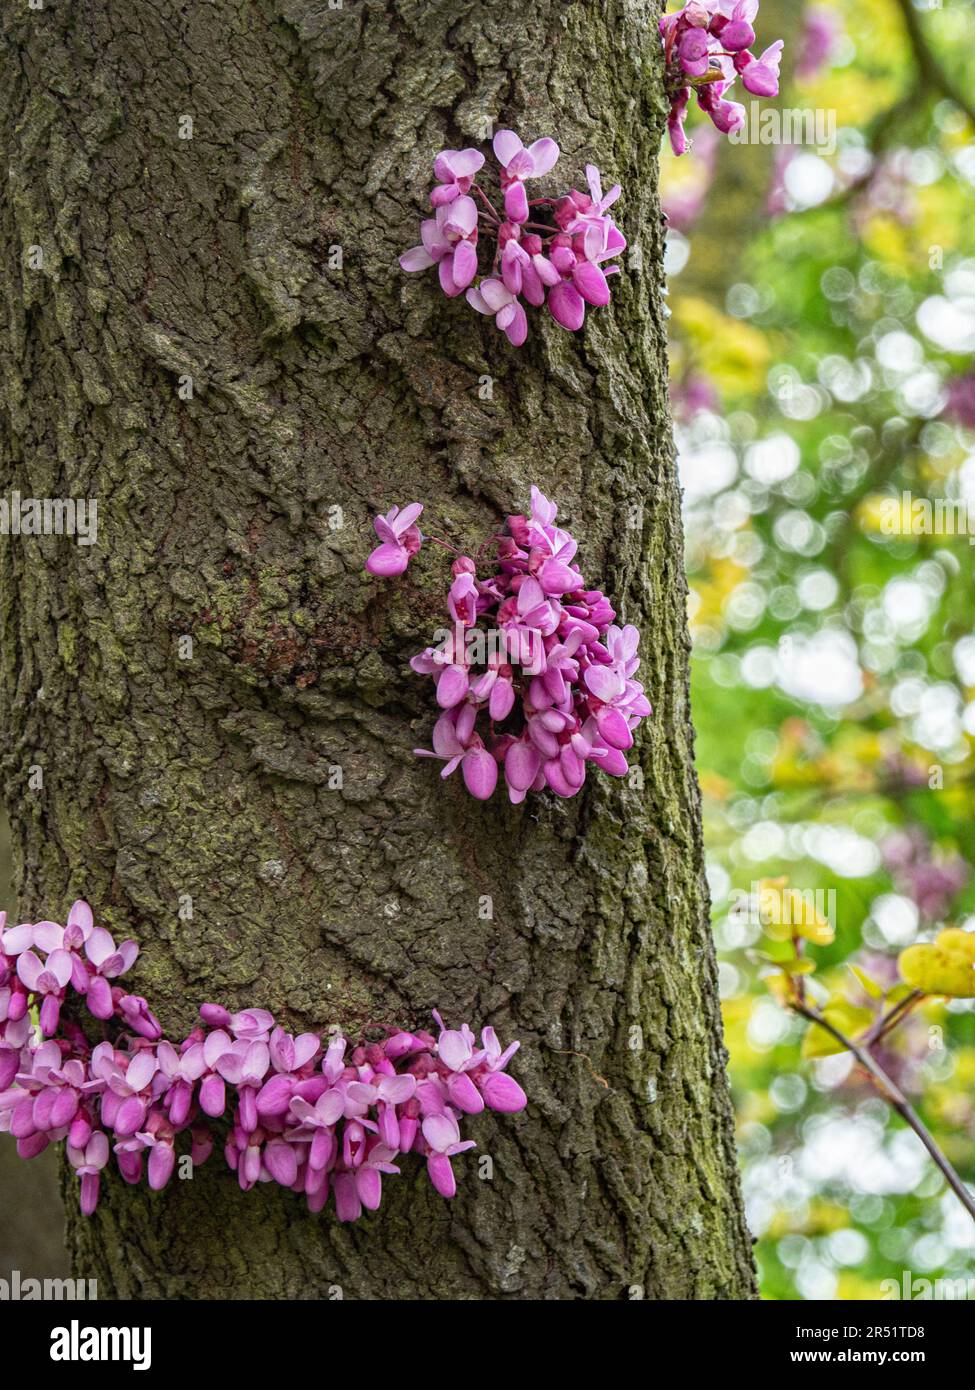 A group deep pink of epicormic flowers on the trunk of a Judas tree Cercis siliquastrum Stock Photo